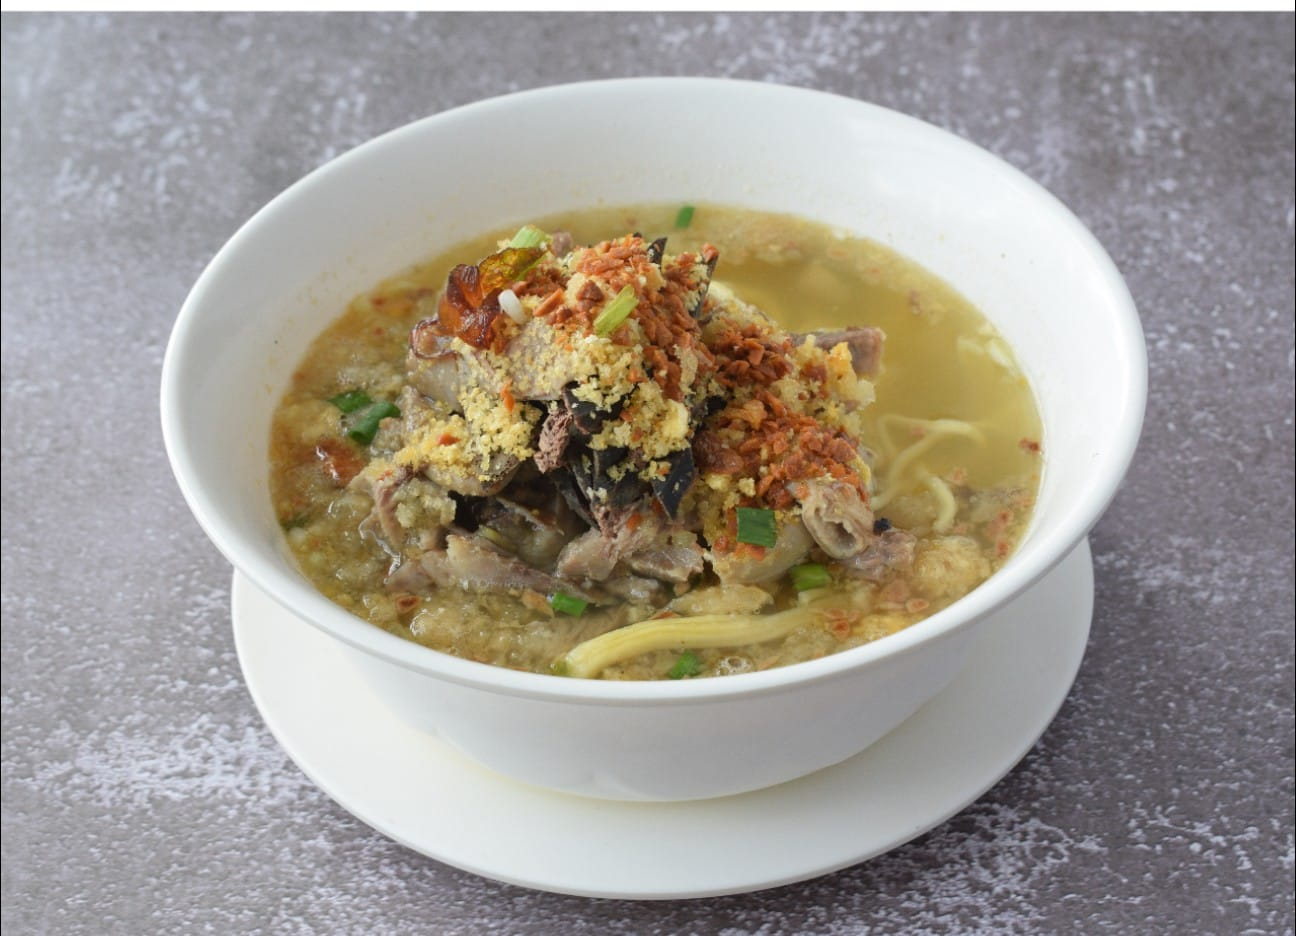 Iloilo's very own La Paz batchoy, always hot and ready to warm hearts –  photo from Ted's Original La Paz Batchoy